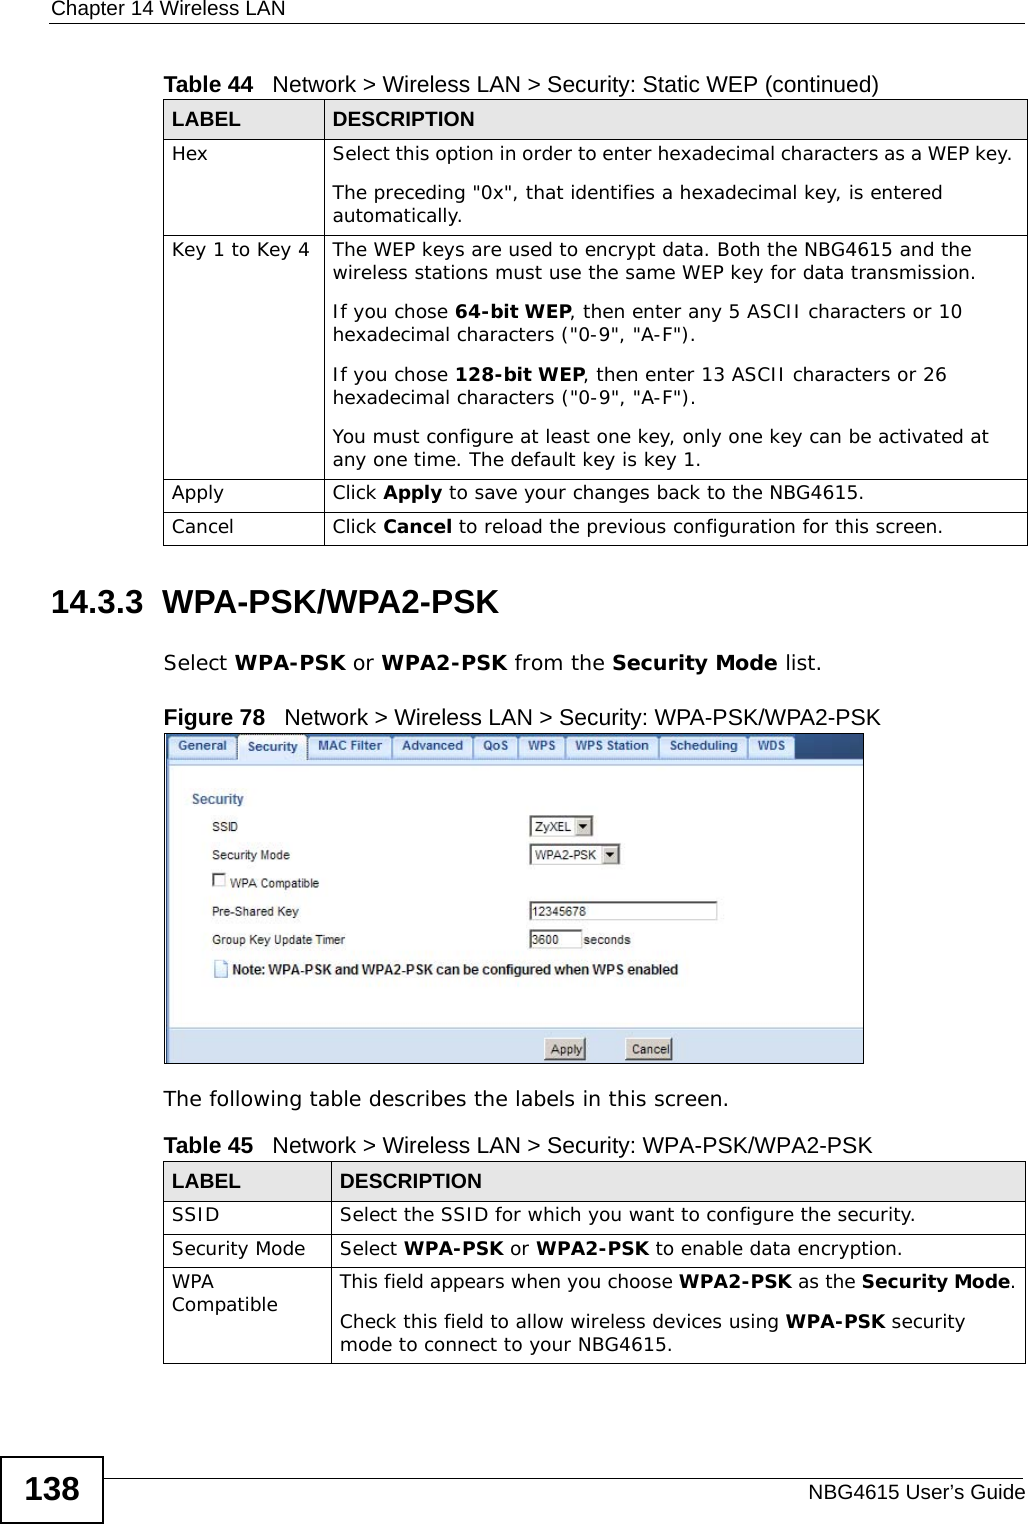 Chapter 14 Wireless LANNBG4615 User’s Guide13814.3.3  WPA-PSK/WPA2-PSKSelect WPA-PSK or WPA2-PSK from the Security Mode list.Figure 78   Network &gt; Wireless LAN &gt; Security: WPA-PSK/WPA2-PSKThe following table describes the labels in this screen.Hex Select this option in order to enter hexadecimal characters as a WEP key. The preceding &quot;0x&quot;, that identifies a hexadecimal key, is entered automatically.Key 1 to Key 4 The WEP keys are used to encrypt data. Both the NBG4615 and the wireless stations must use the same WEP key for data transmission.If you chose 64-bit WEP, then enter any 5 ASCII characters or 10 hexadecimal characters (&quot;0-9&quot;, &quot;A-F&quot;).If you chose 128-bit WEP, then enter 13 ASCII characters or 26 hexadecimal characters (&quot;0-9&quot;, &quot;A-F&quot;). You must configure at least one key, only one key can be activated at any one time. The default key is key 1.Apply Click Apply to save your changes back to the NBG4615.Cancel Click Cancel to reload the previous configuration for this screen.Table 44   Network &gt; Wireless LAN &gt; Security: Static WEP (continued)LABEL DESCRIPTIONTable 45   Network &gt; Wireless LAN &gt; Security: WPA-PSK/WPA2-PSKLABEL DESCRIPTIONSSID Select the SSID for which you want to configure the security.Security Mode Select WPA-PSK or WPA2-PSK to enable data encryption.WPA Compatible This field appears when you choose WPA2-PSK as the Security Mode.Check this field to allow wireless devices using WPA-PSK security mode to connect to your NBG4615.